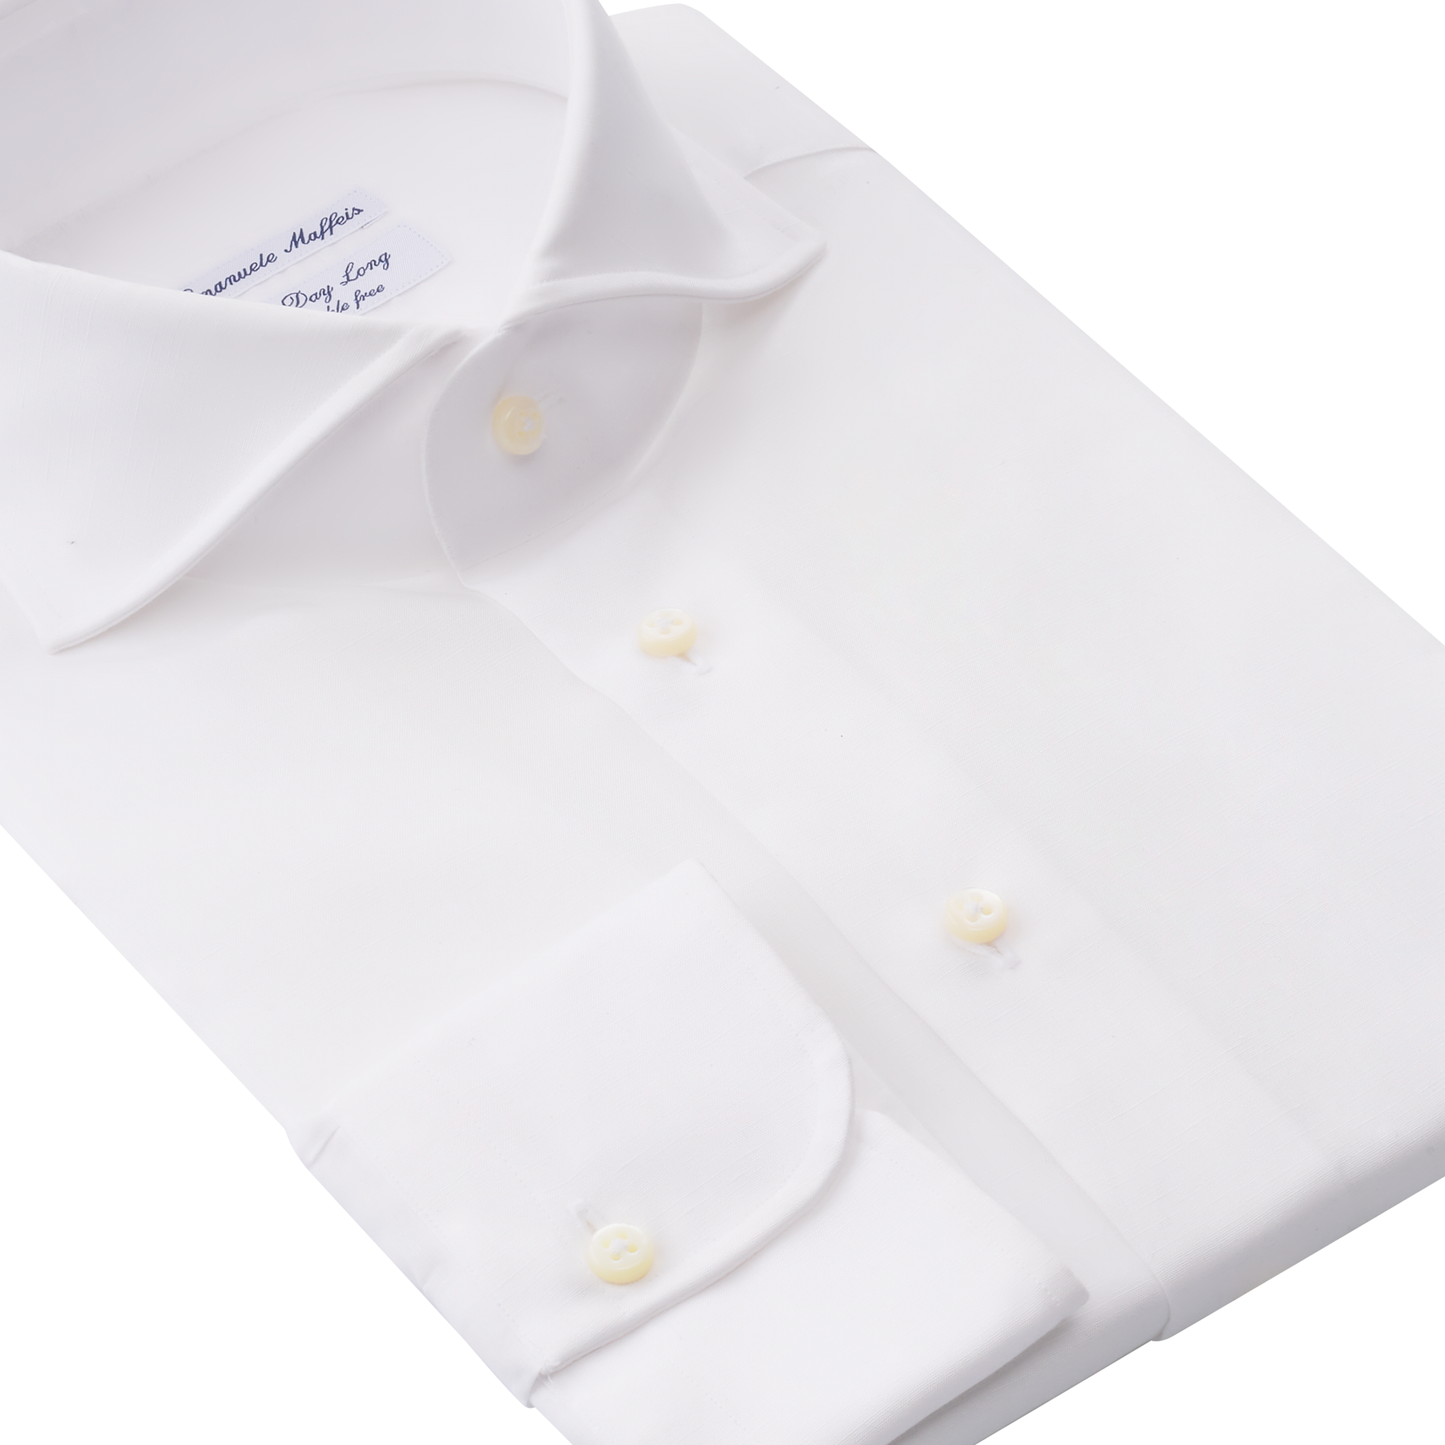 Emanuele Maffeis "All Day Long Collection" Linen and Cotton-Blend White Shirt - SARTALE